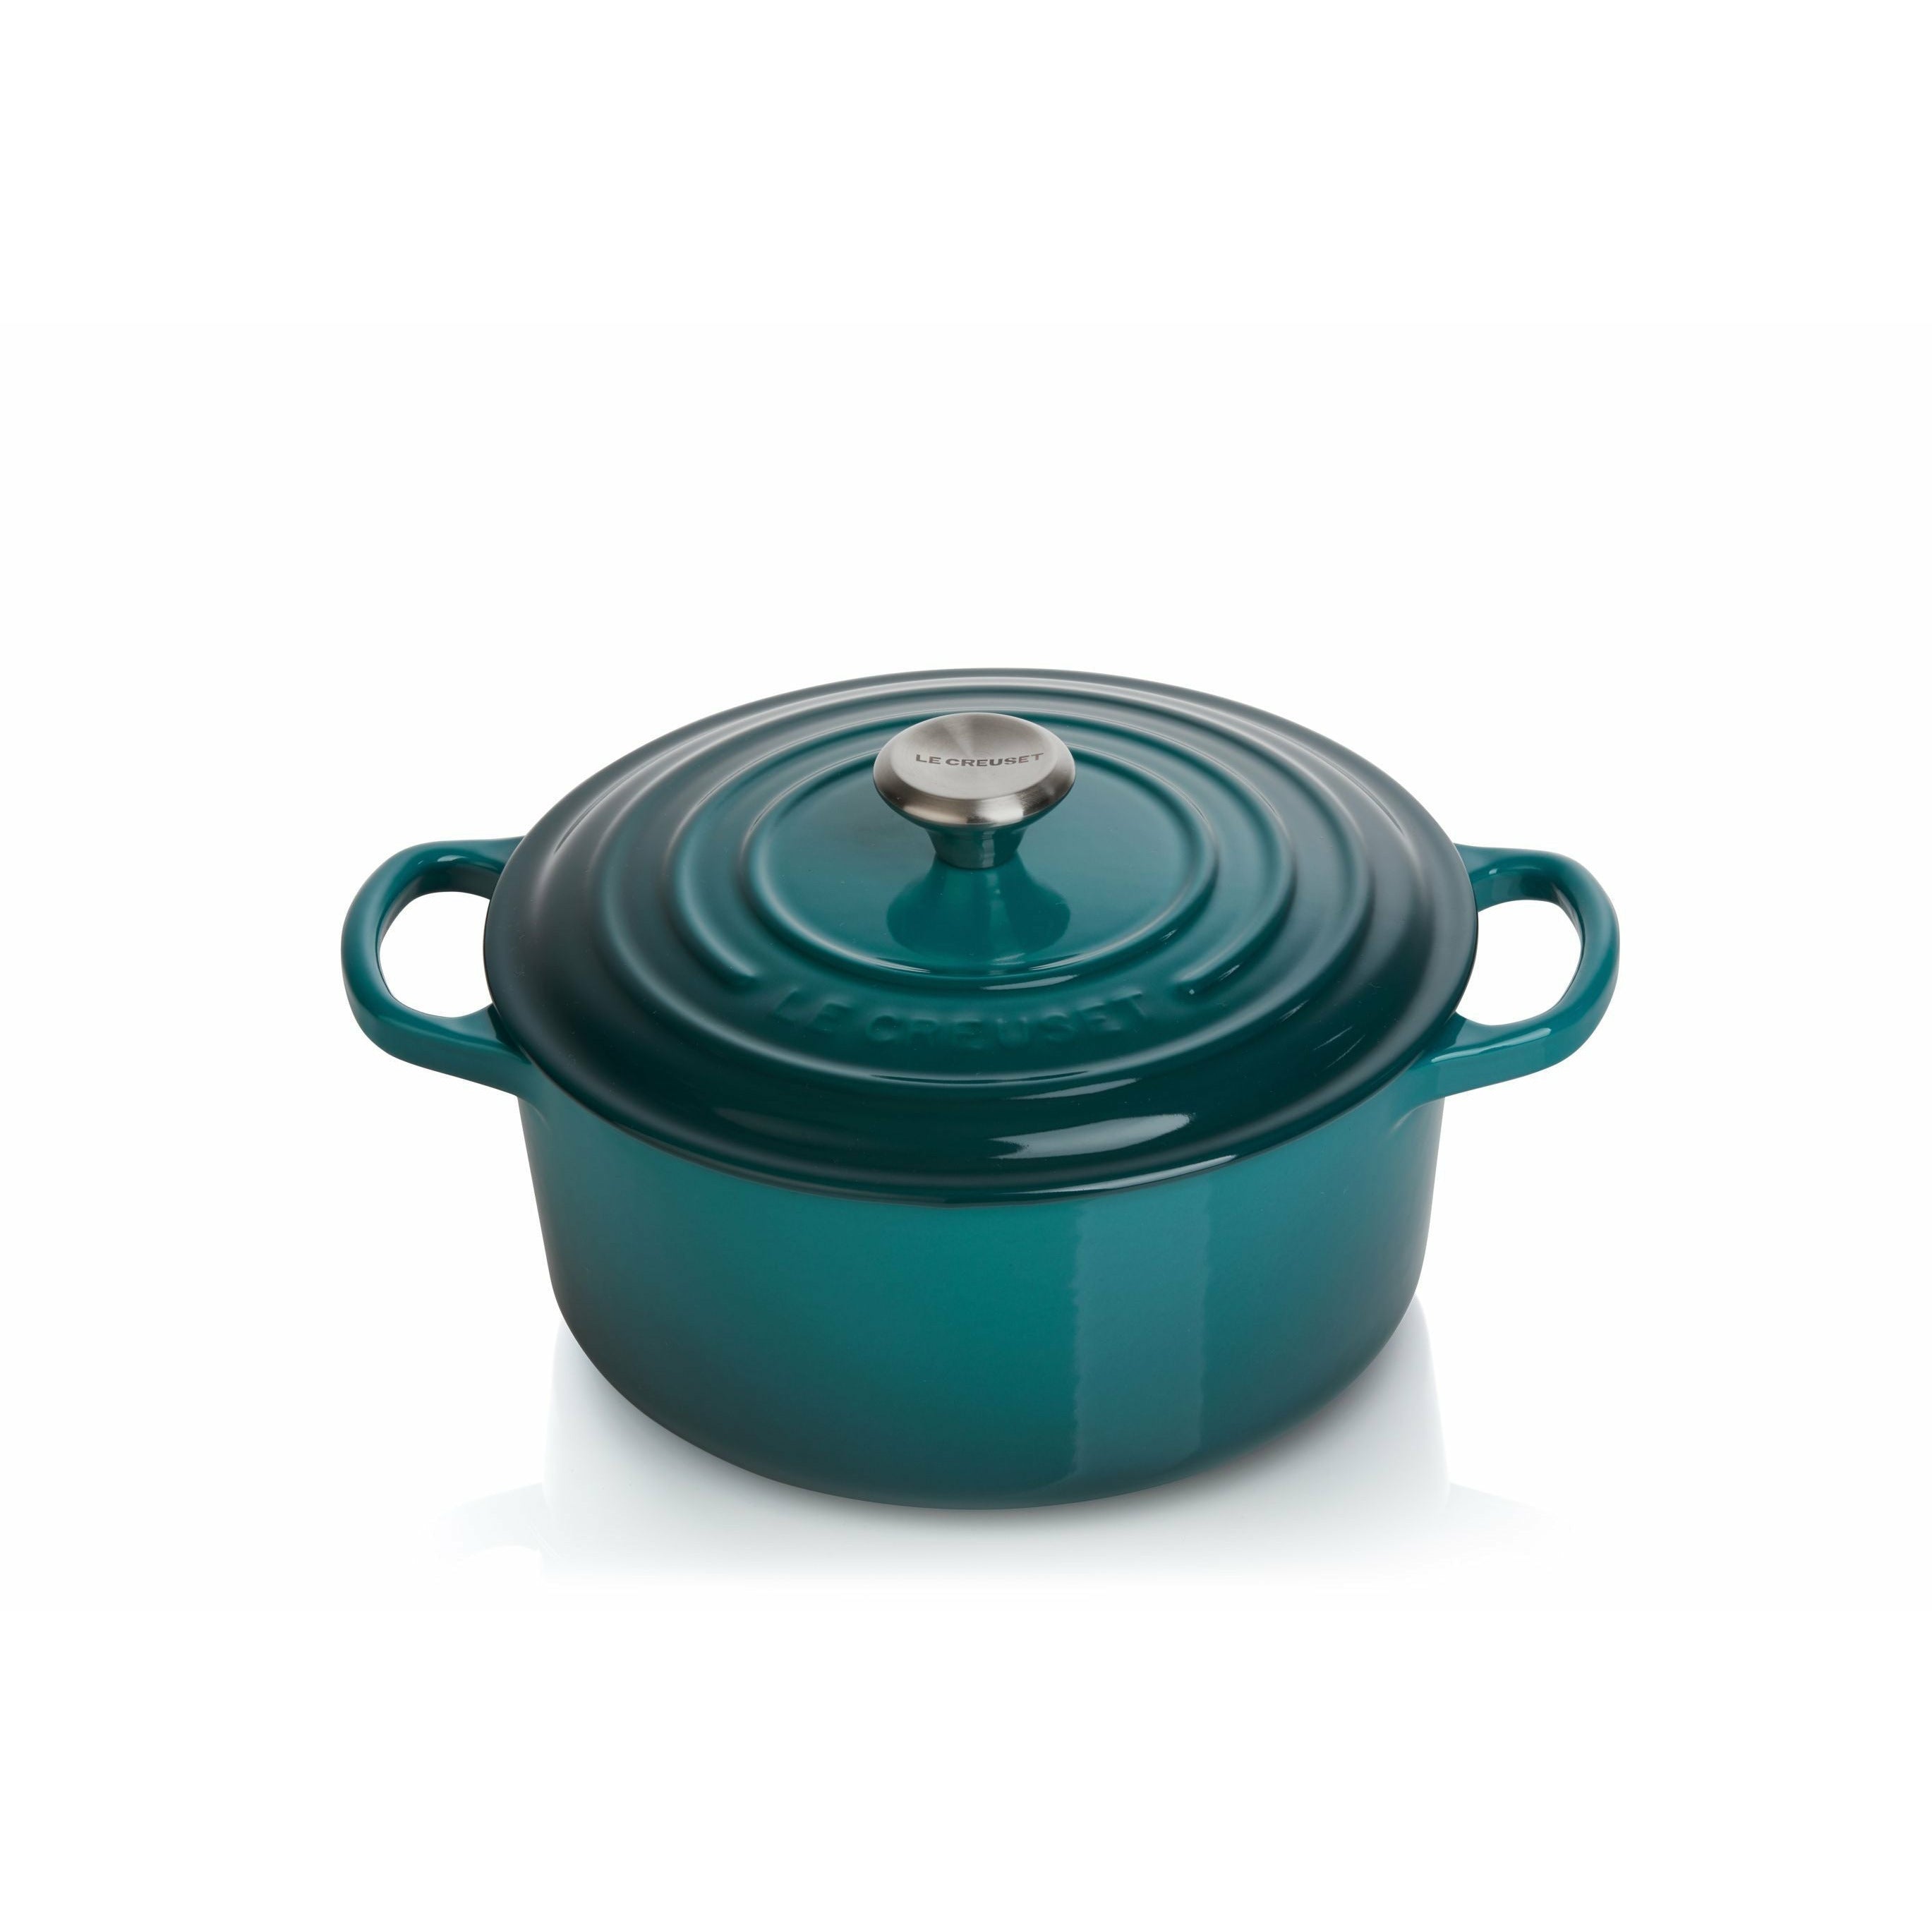 Le Creuset Signature Round Roaster 24 cm, dyp teal